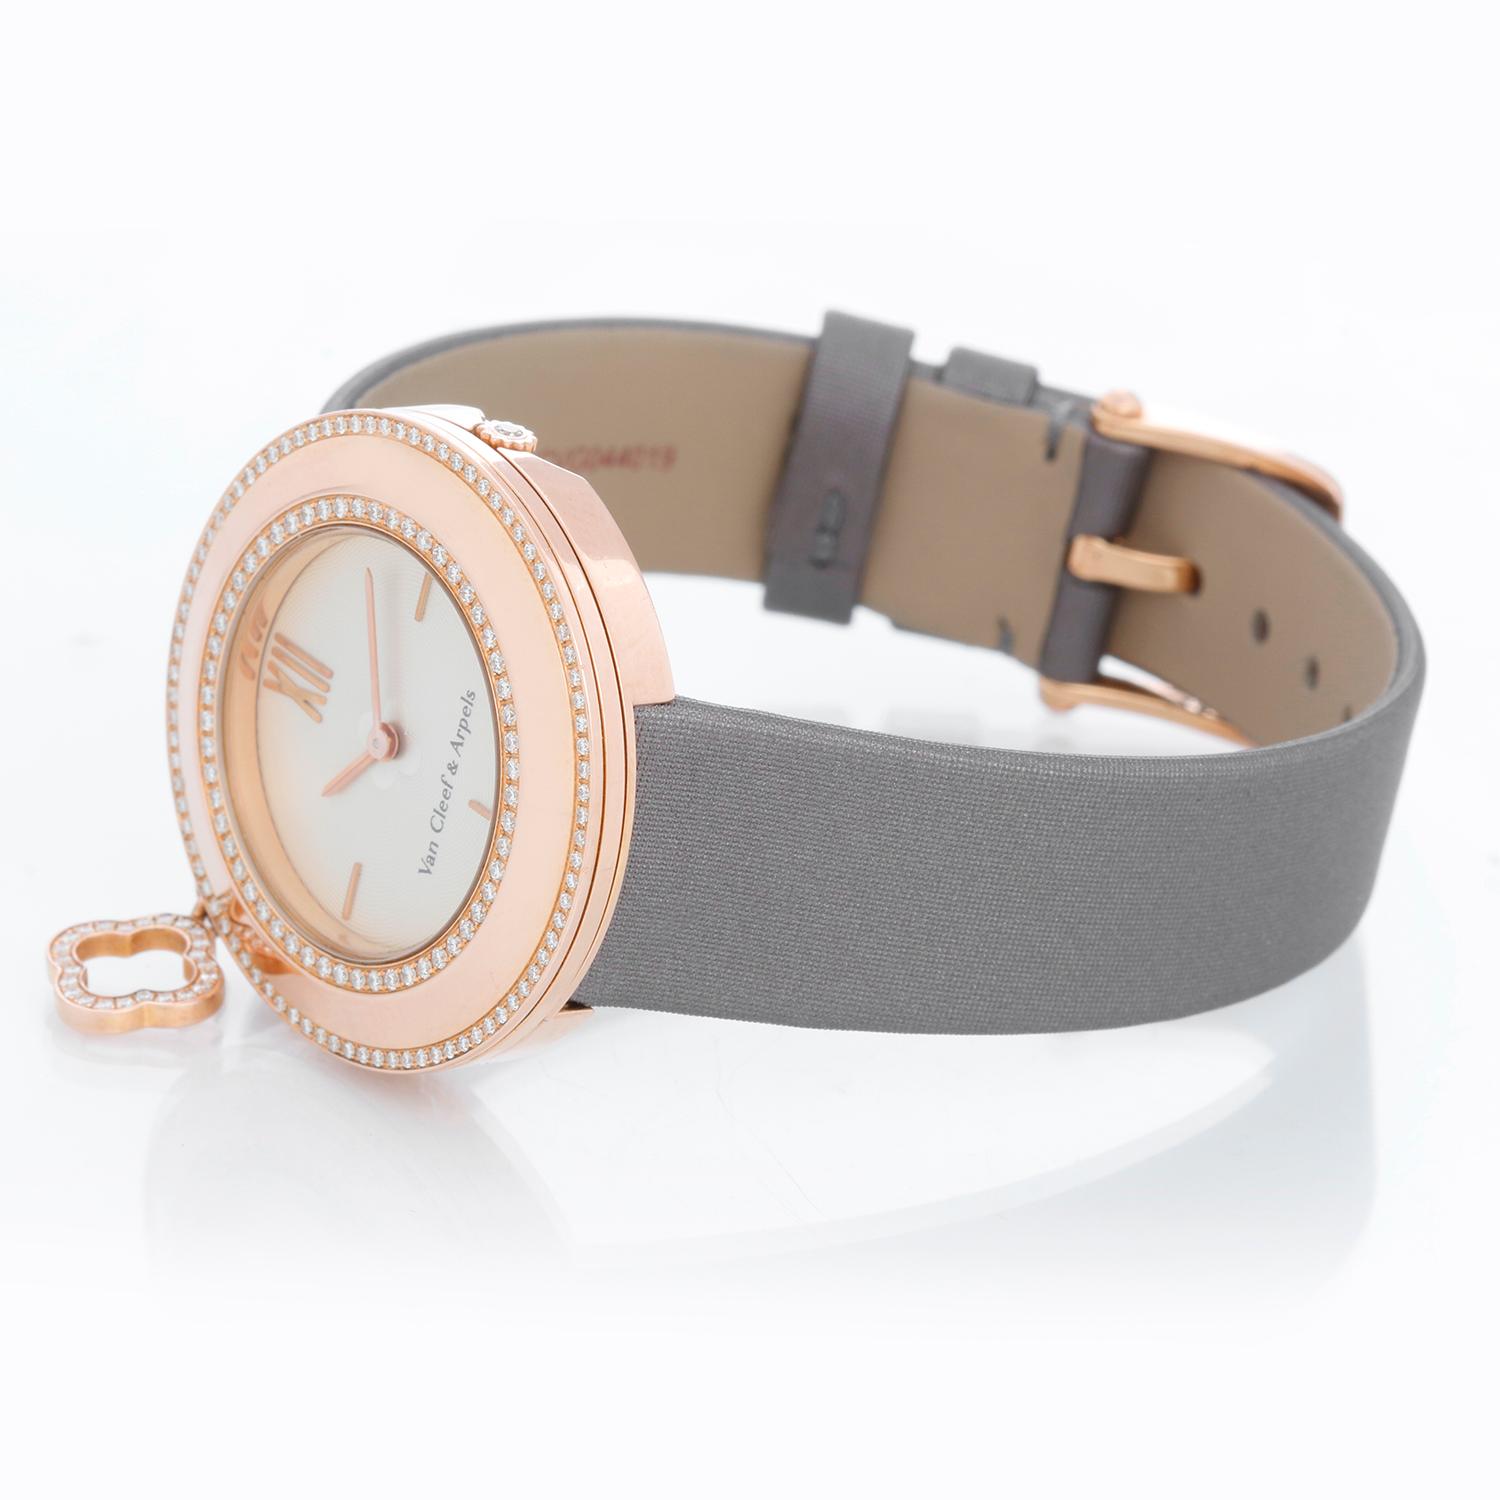 Van Cleef & Arpels Charms 18K Rose Gold Diamond Watch VCARM95000 - Quartz. 18K Rose gold case ( 32 mm ) with two rows of diamonds; small Alhambra charm with diamonds on the side. Guilloche white dial with raised 18K Rose gold numerals. Brand new Van